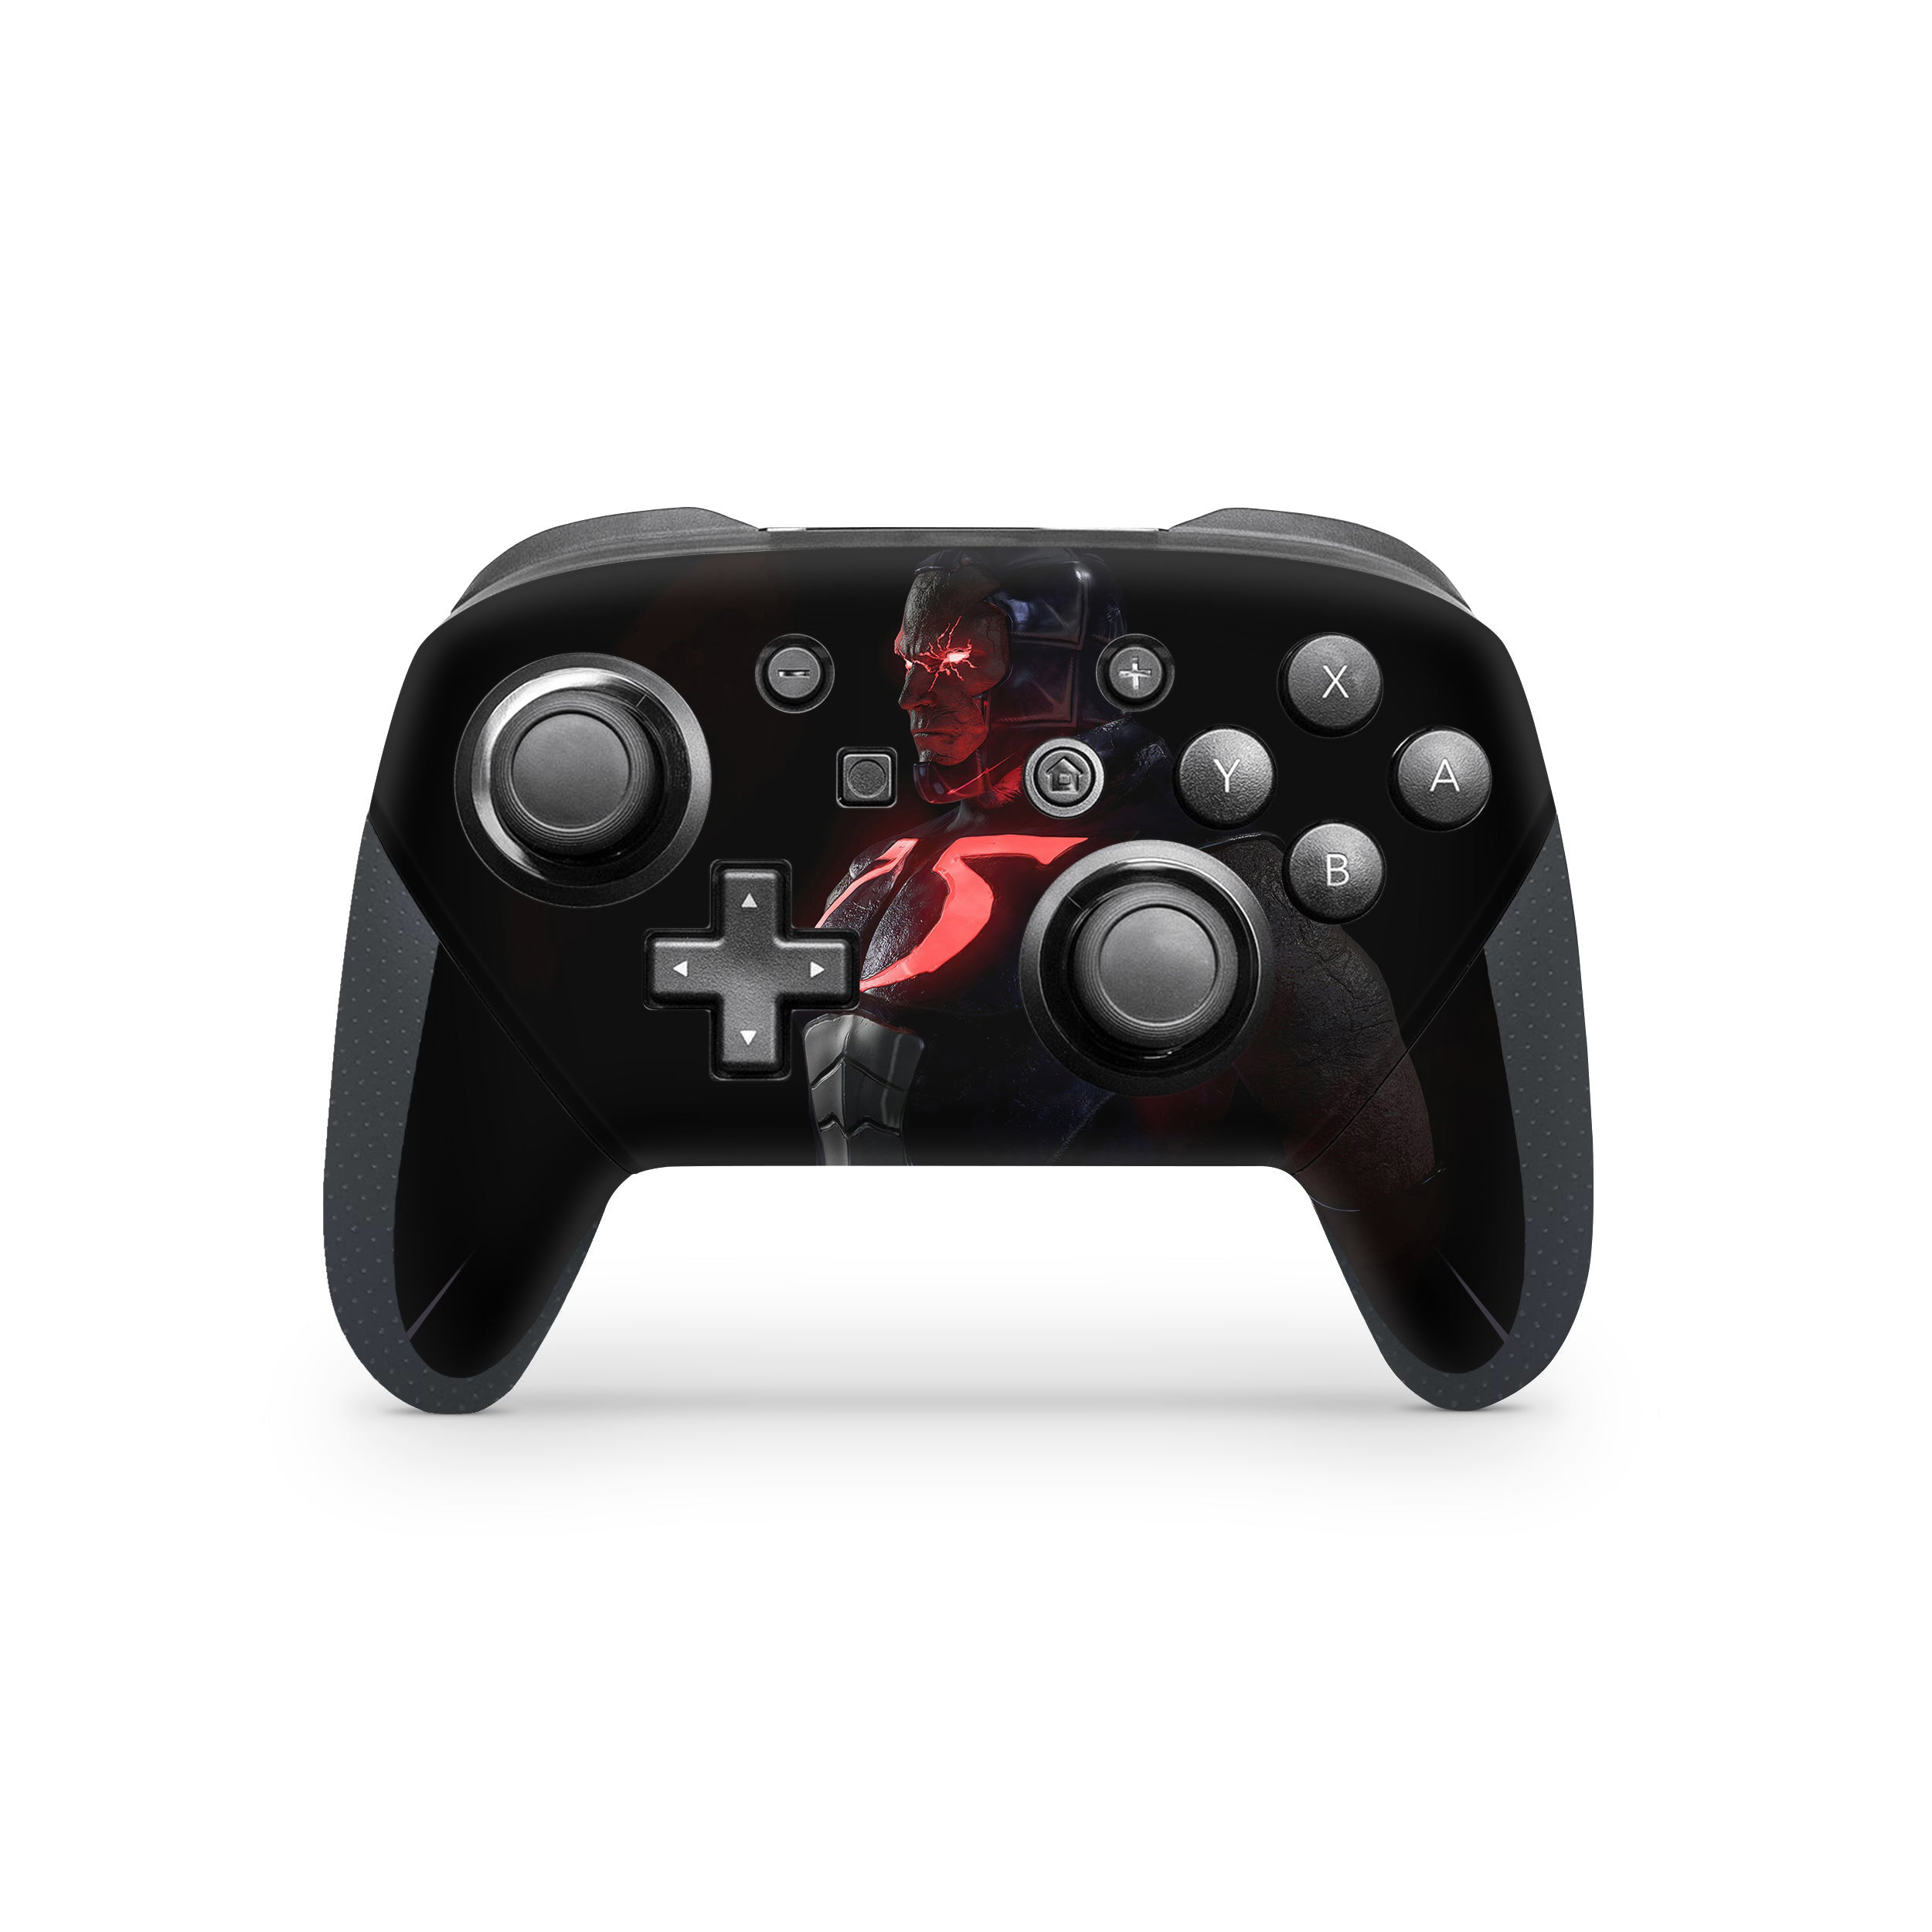 A video game skin featuring a DC Comics Darkseid design for the Switch Pro Controller.